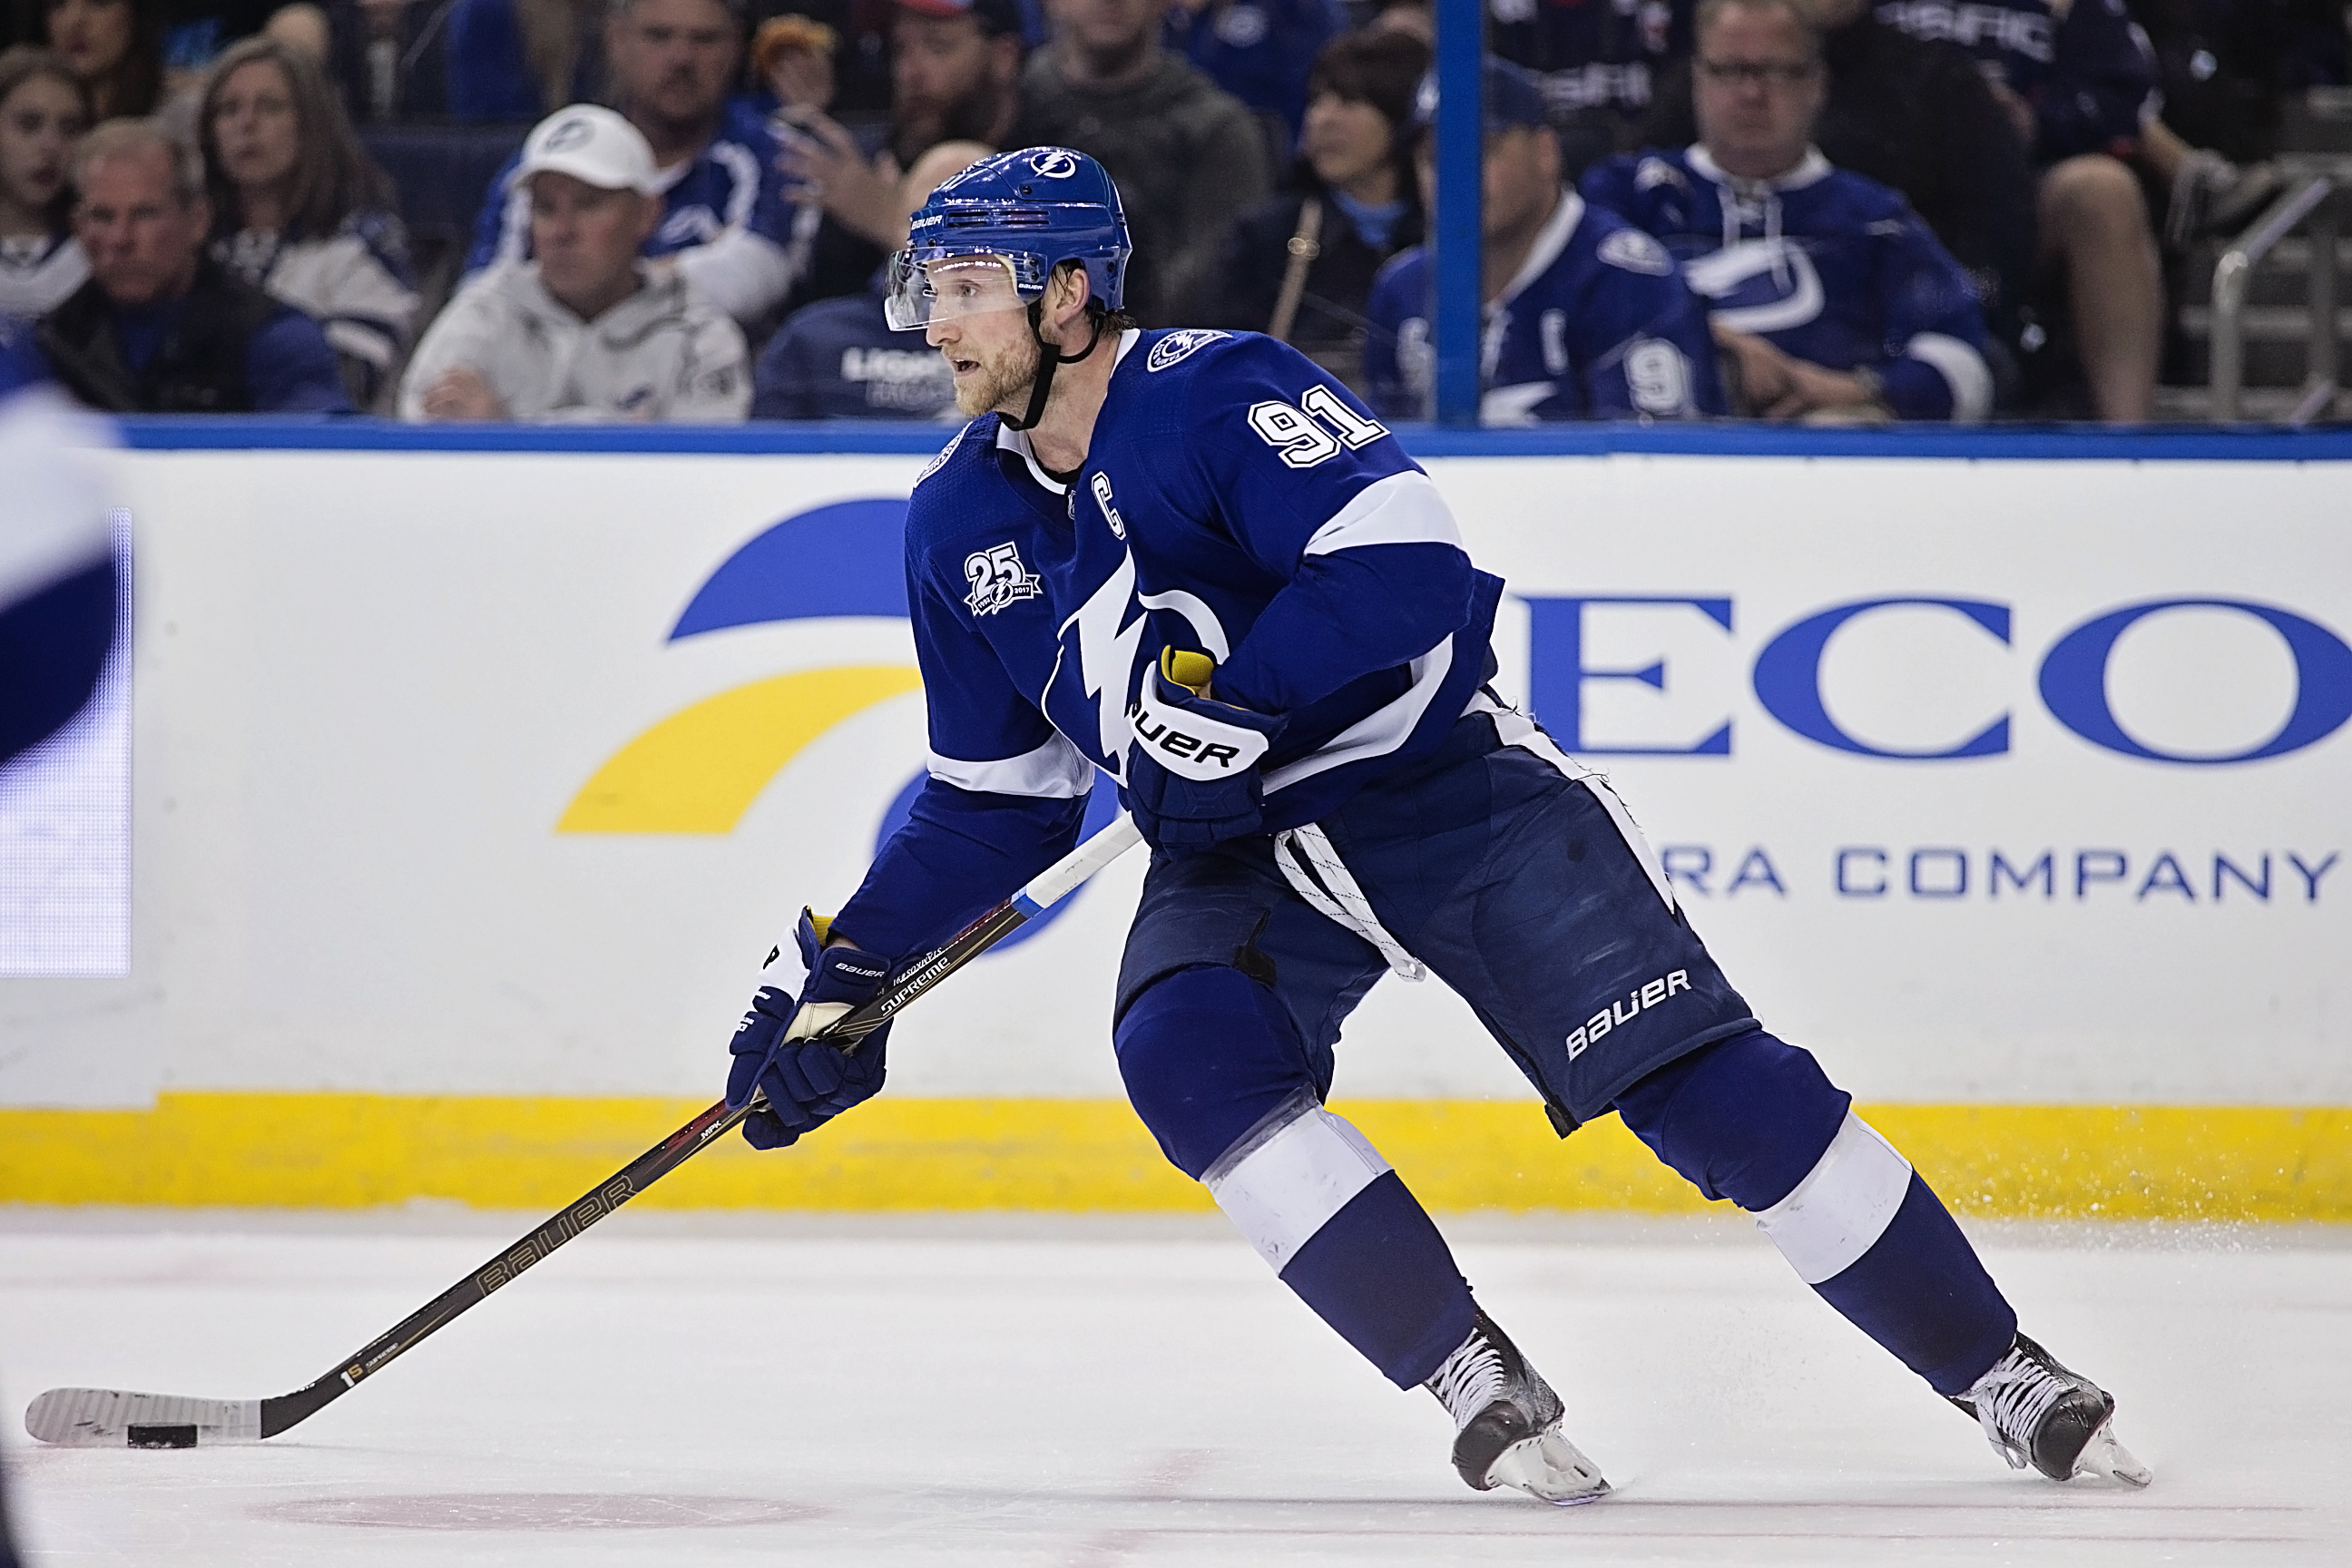 Stamkos had three assists for the Bolts./CARMEN MANDATO